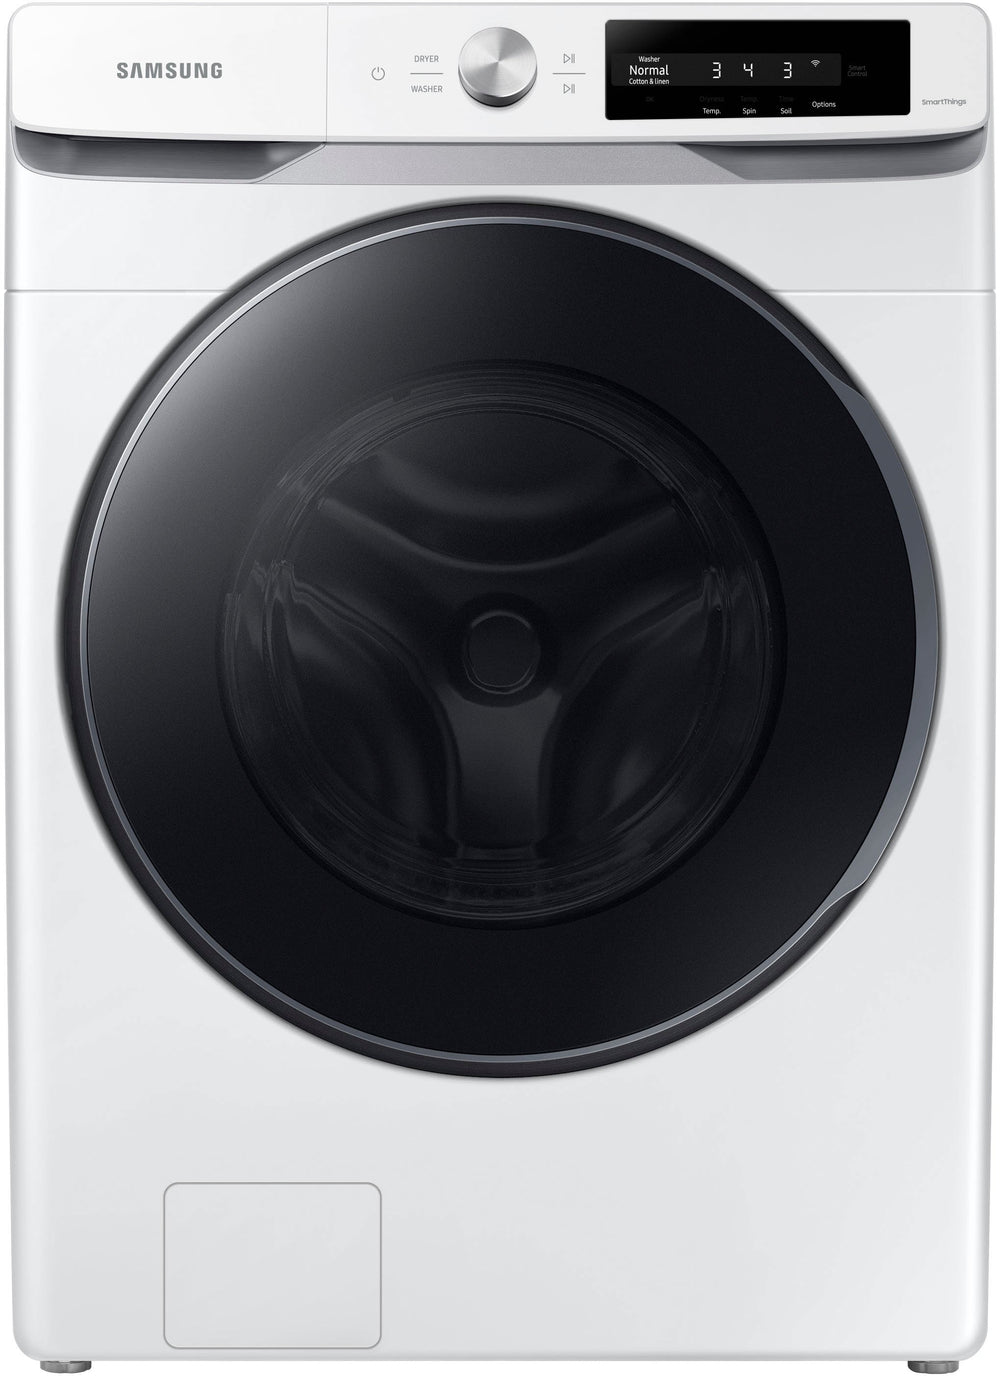 Samsung - 4.5 cu. ft. Large Capacity Smart Dial Front Load Washer with Super Speed Wash - White_1